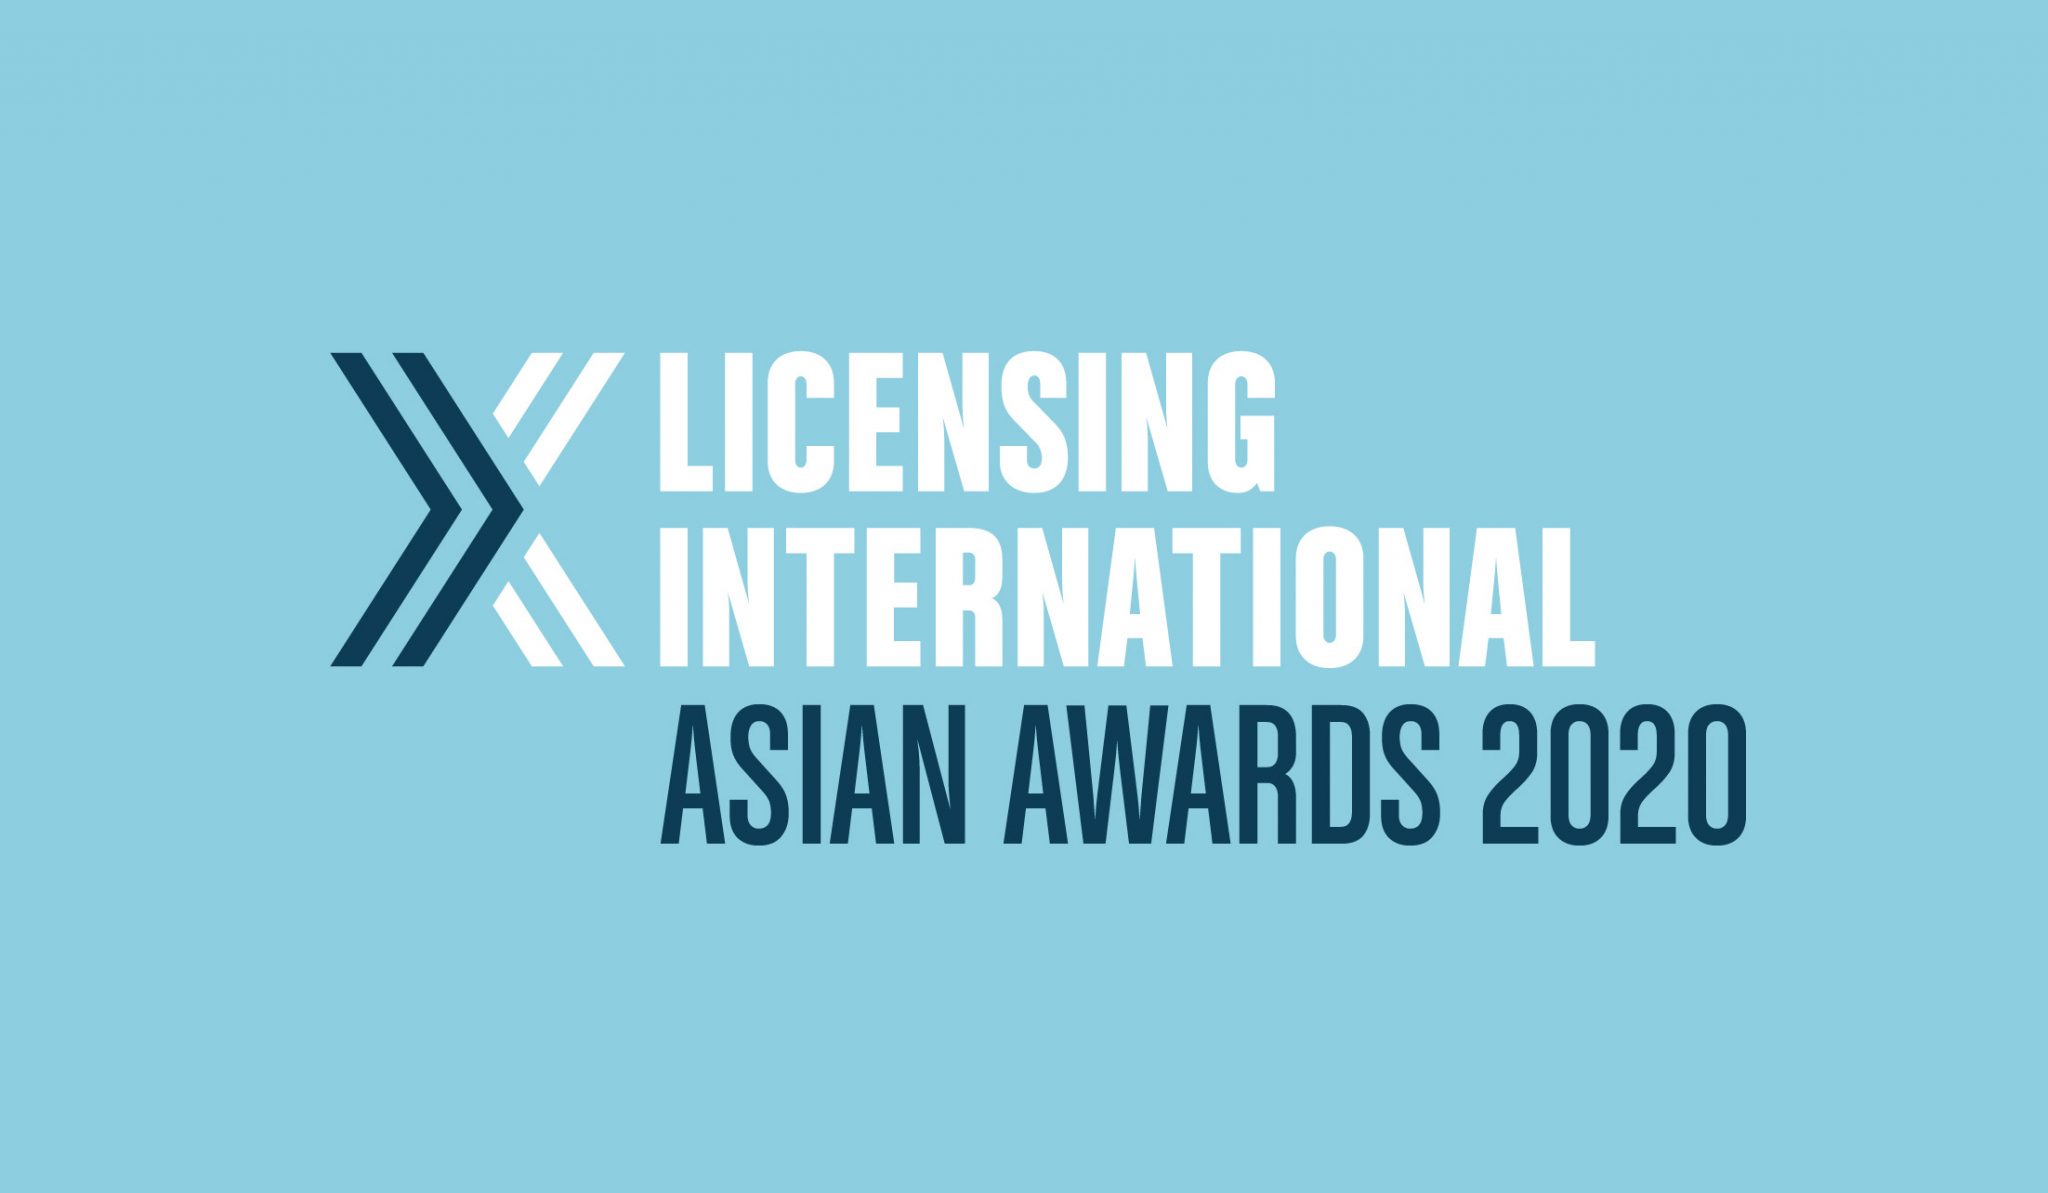 Licensing International Asian Awards 2020 are open for entries image